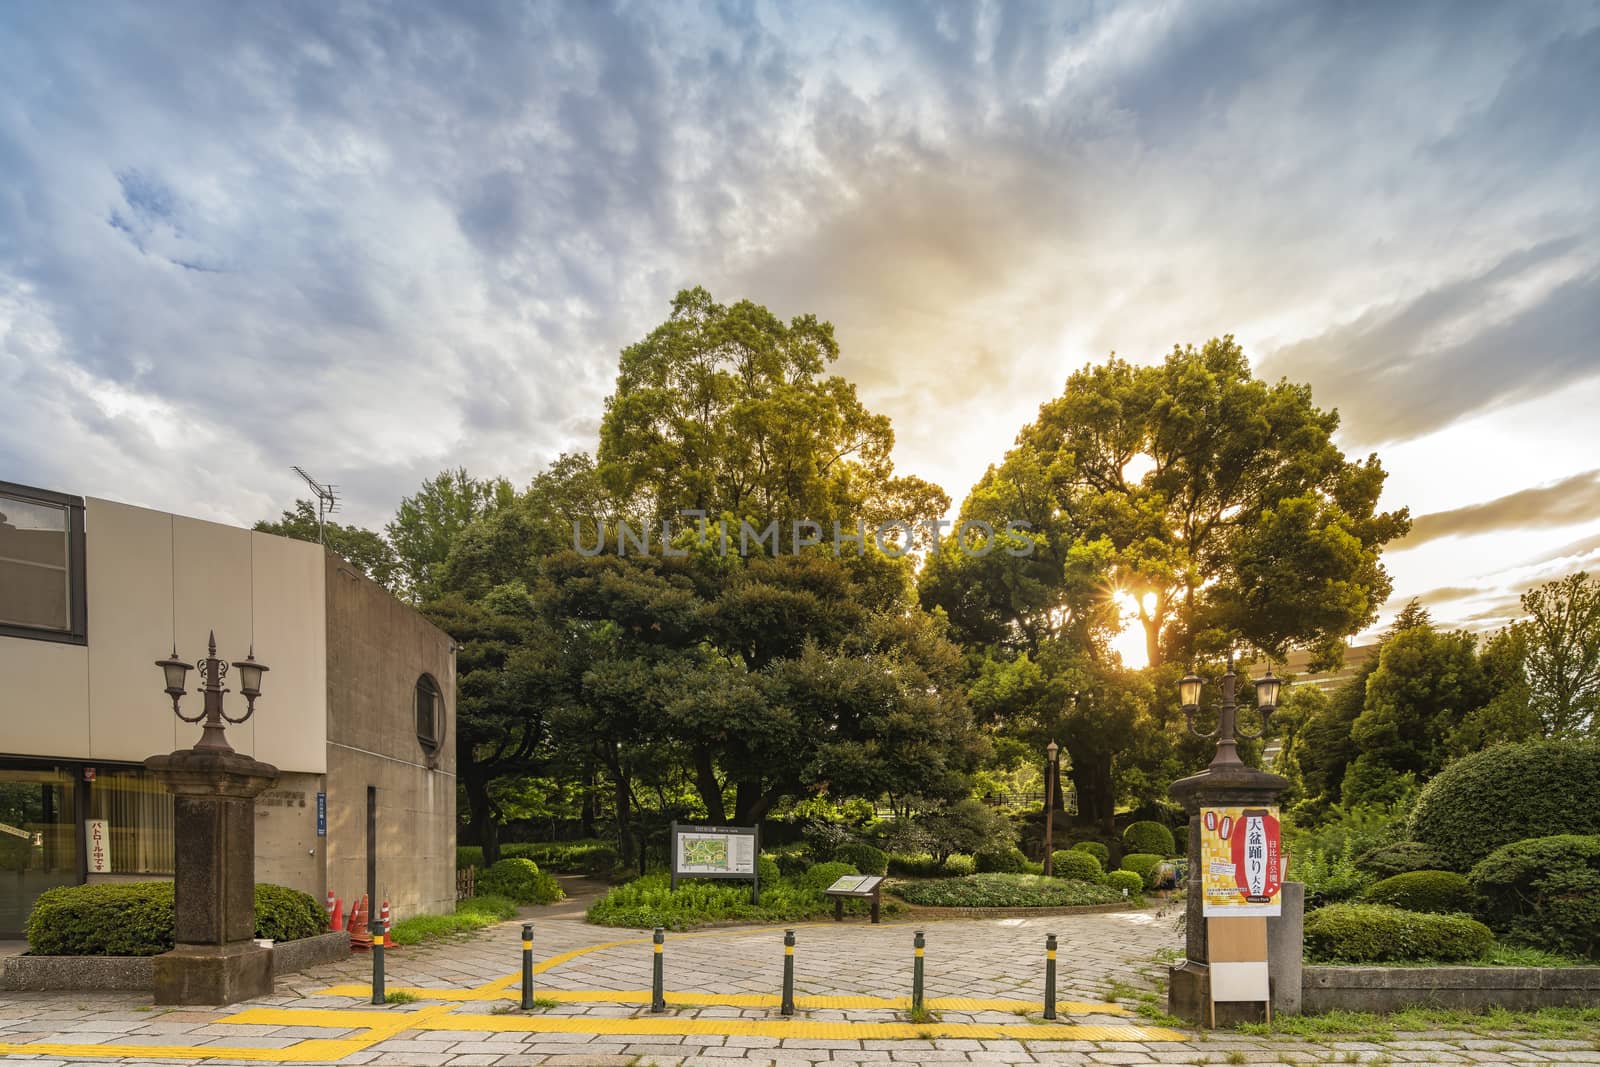 Sunset sky on the entrance of the Hibiya Park (日比谷公園 Hibiya Kōen) in Chiyoda City of Tokyo in Japan. Its entrance is decorated with Gothic cast iron lanterns from the 1930s. The poster on the right pillar informs about the Obon Festival that takes place every year in summer to celebrate the deceased ancestors. The modern building on the left is a police station where a sign indicates in red characters that the agent is currently on patrol.